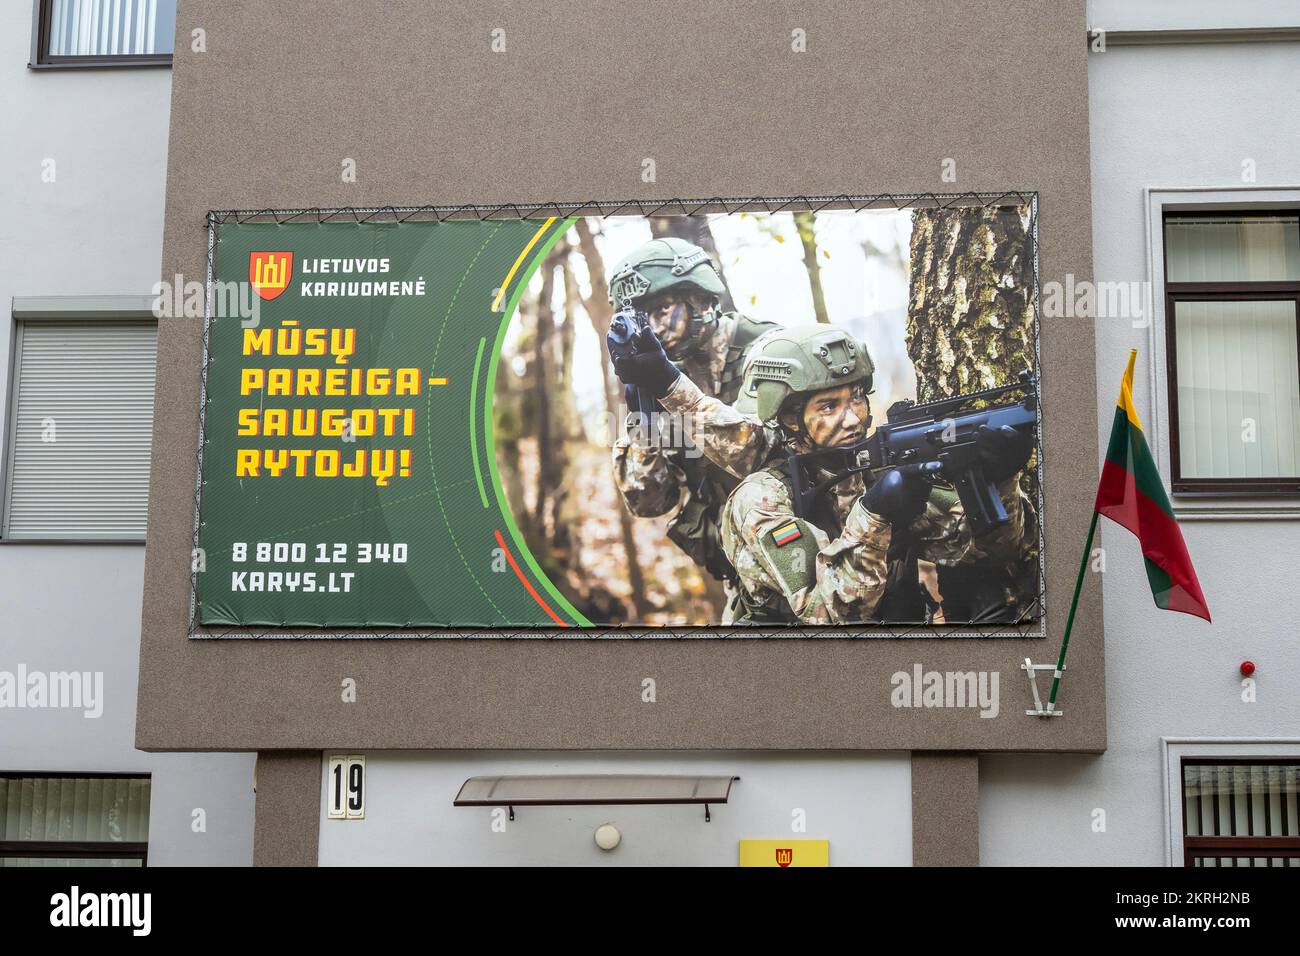 KAUNAS - JULY 09: Public service announcement or social advertisement about Lithuanian Armed Forces on facade of a building  in Kaunas on July 09. 202 Stock Photo